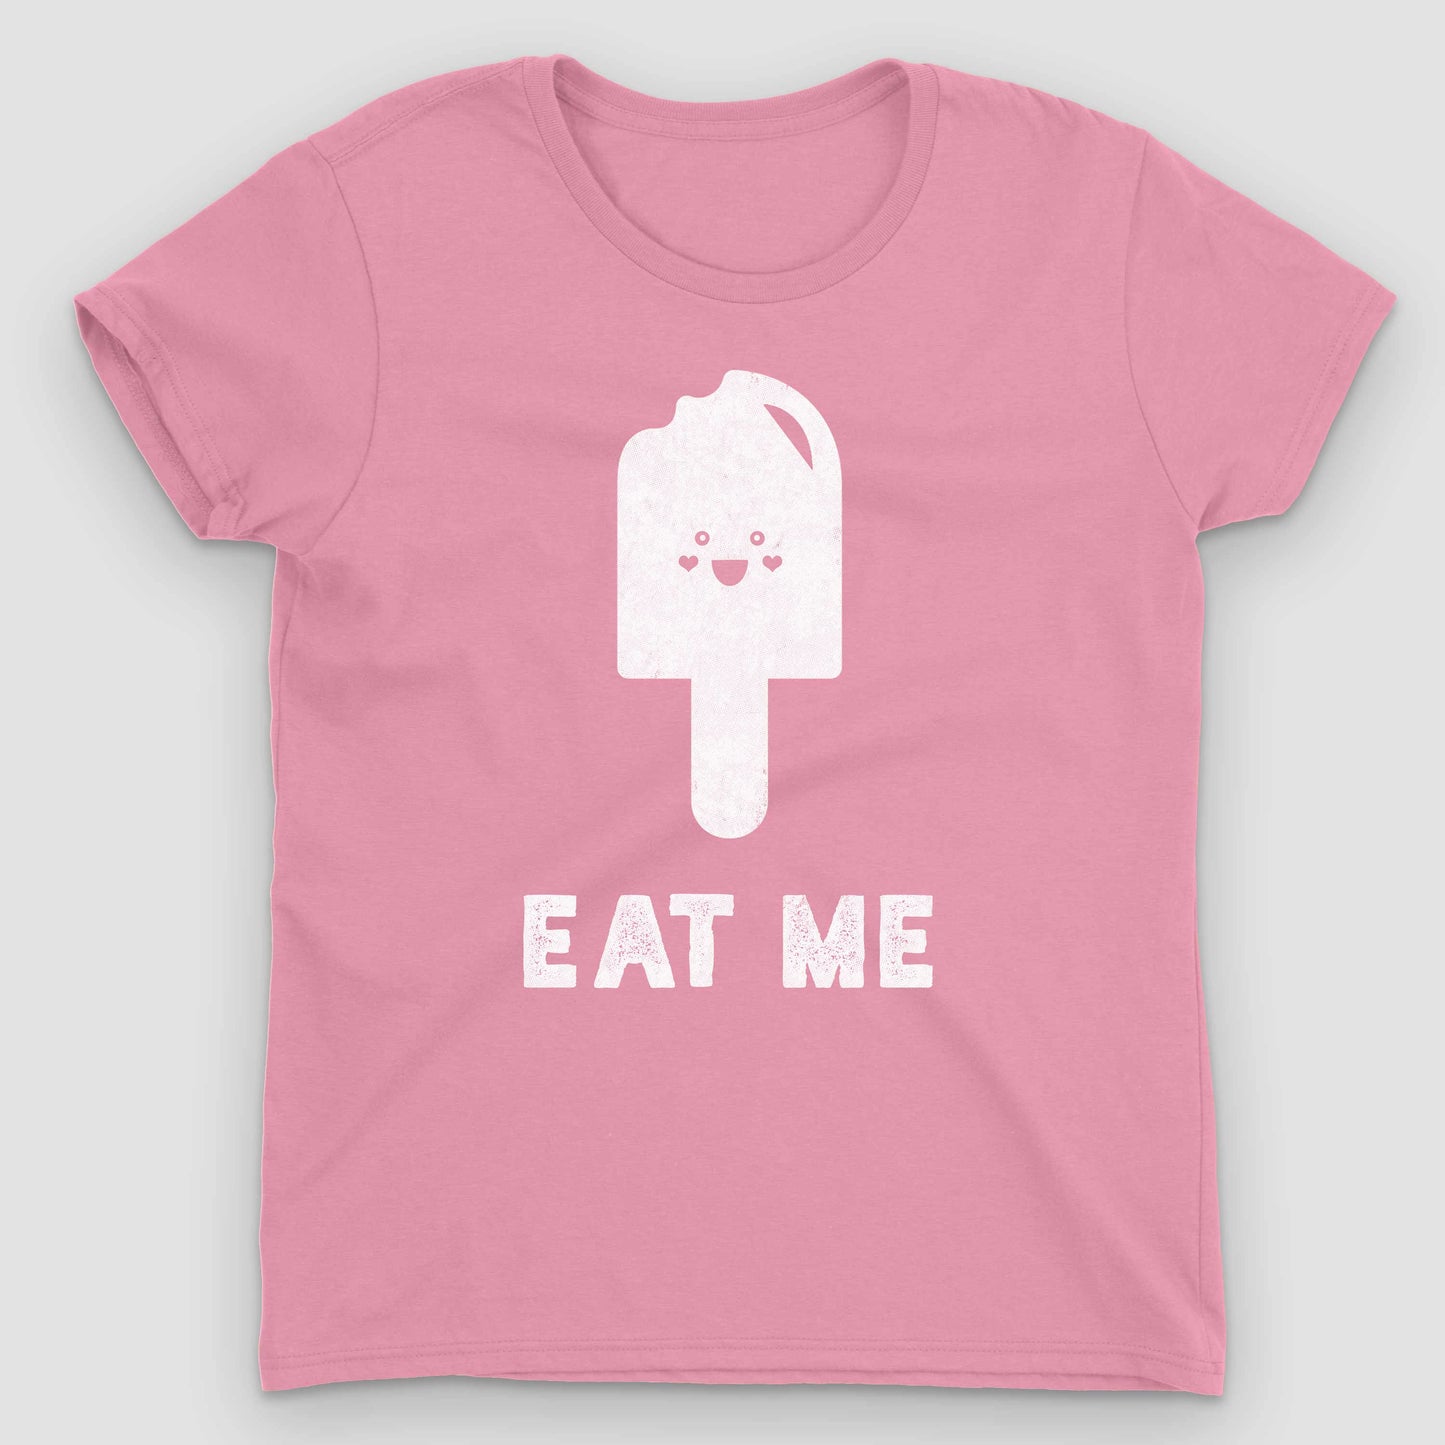 Charity Pink Eat Me Women's Graphic T-Shirt by Snaxtime